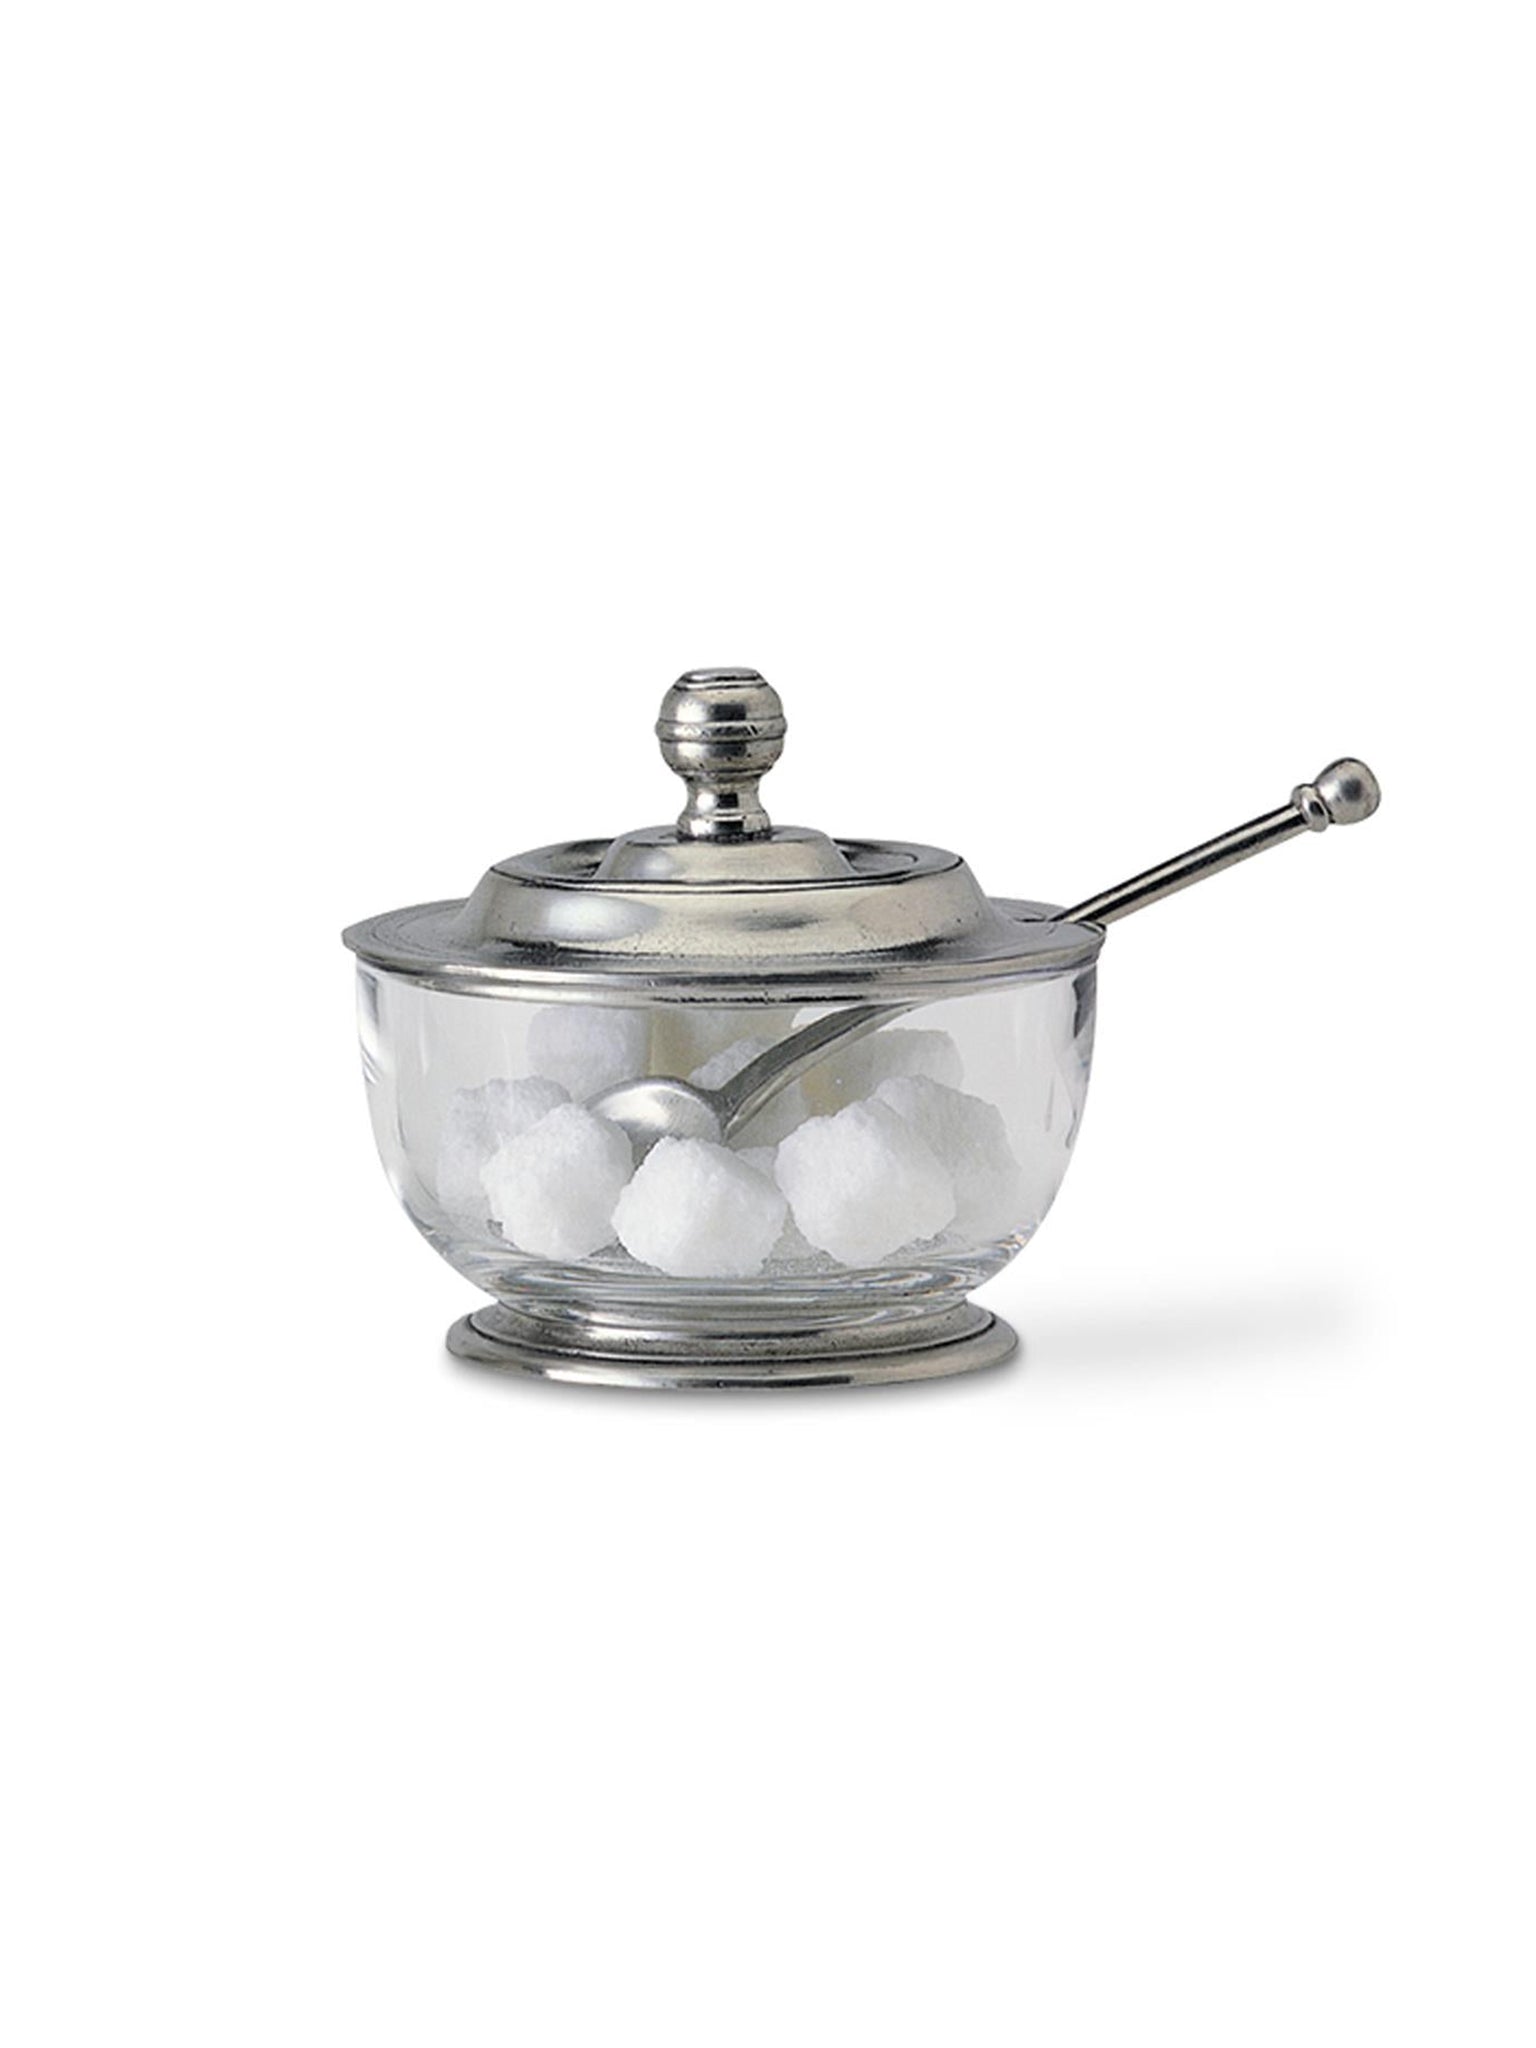 MATCH Pewter Sugar Bowl with Spoon Weston Table